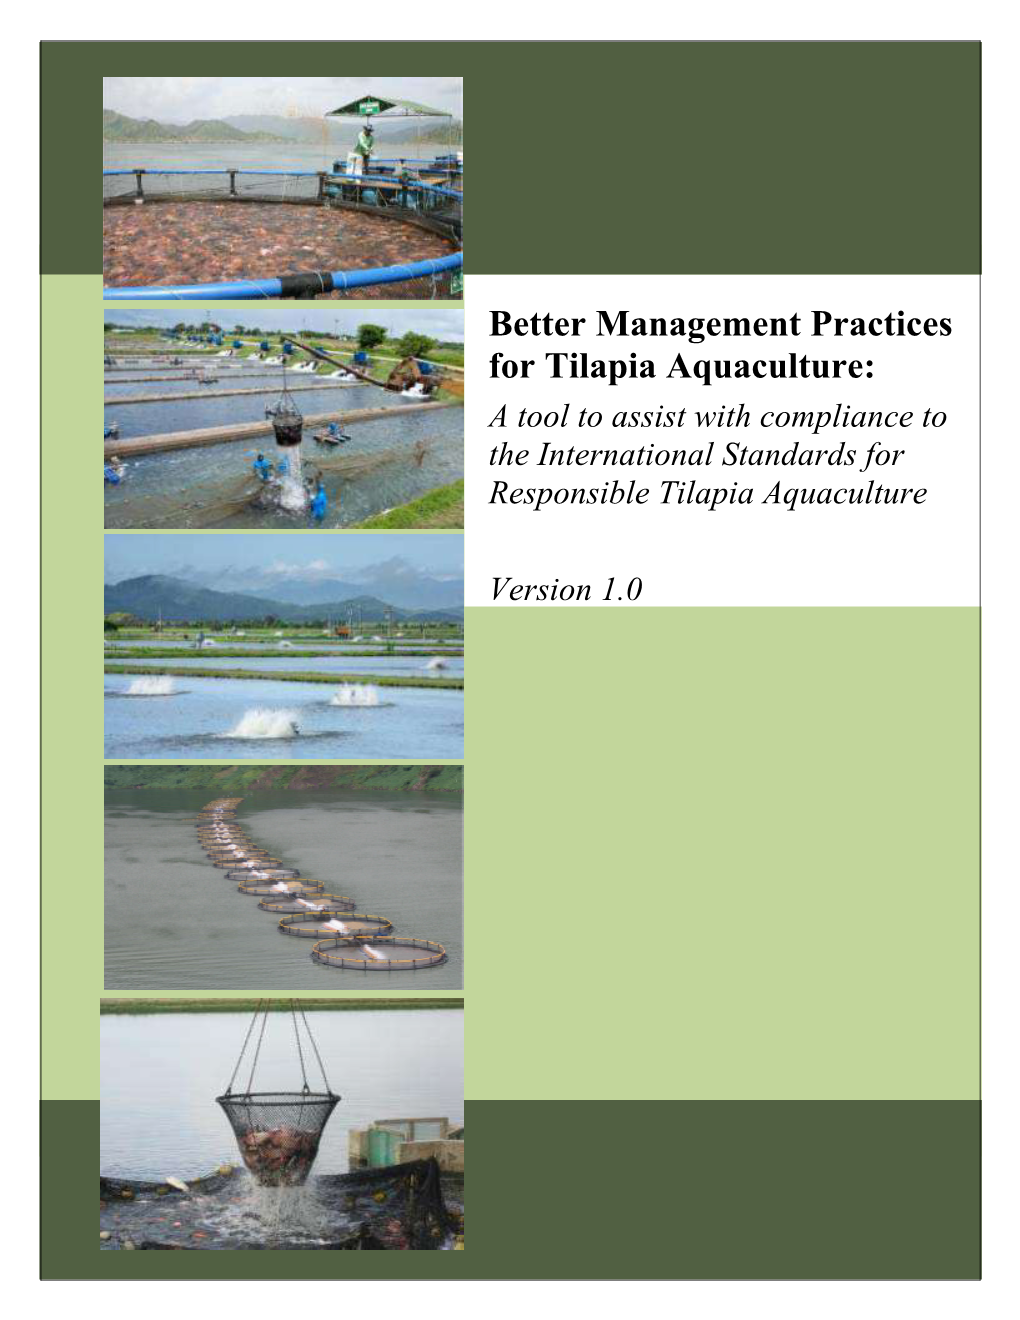 Better Management Practices for Tilapia Aquaculture: a Tool to Assist with Compliance to the International Standards for Responsible Tilapia Aquaculture